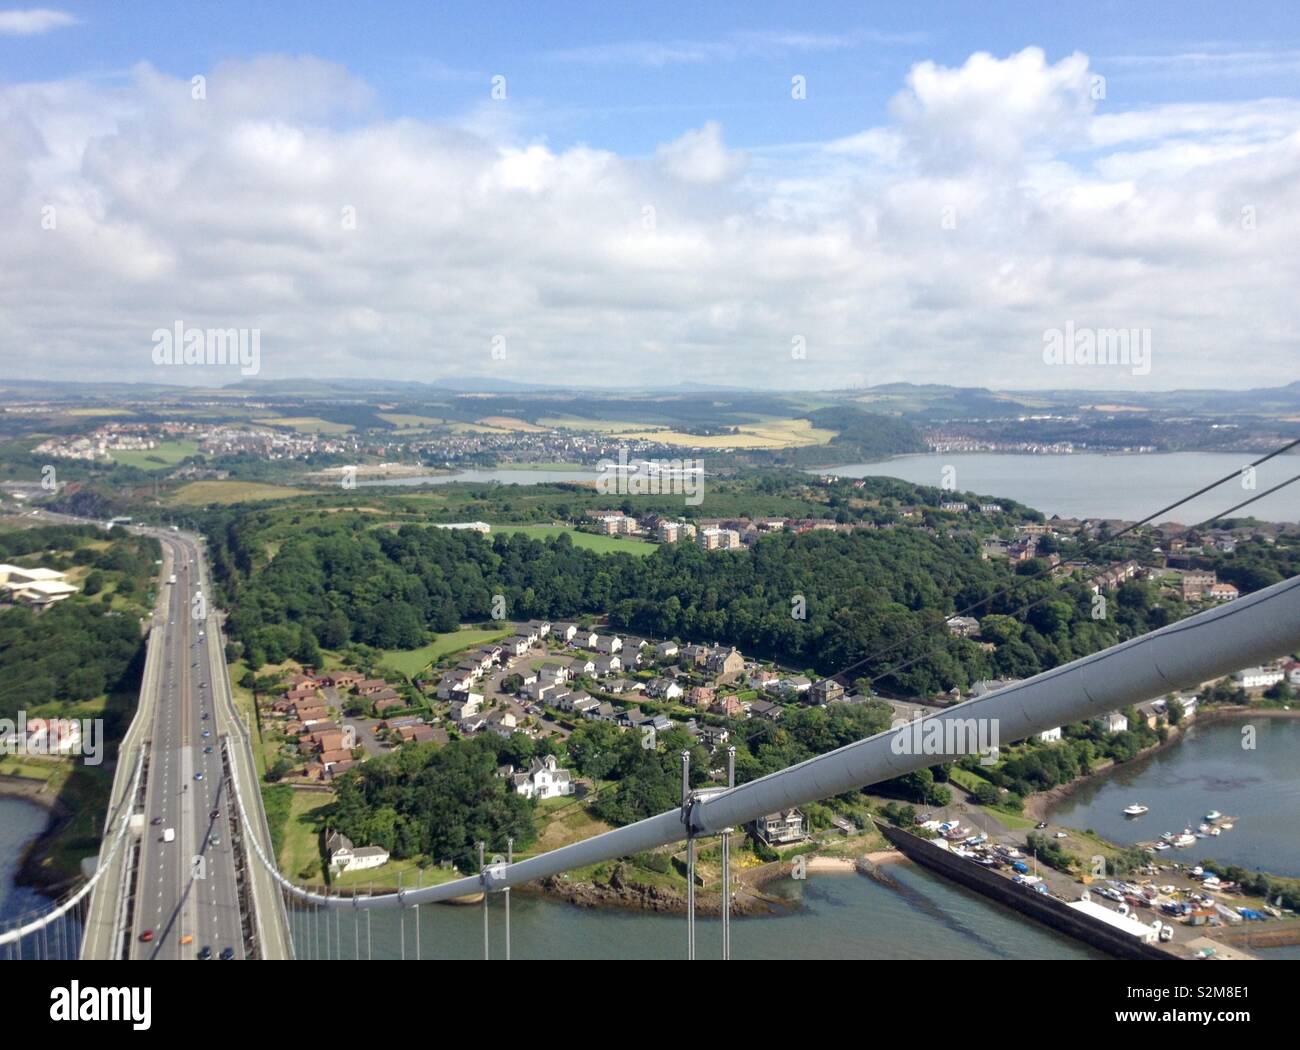 High level view from top of North tower gantry looking down on road deck of Forth Road Bridge overlooking North Queensferry and Firth of Forth, Scotland, UK Stock Photo